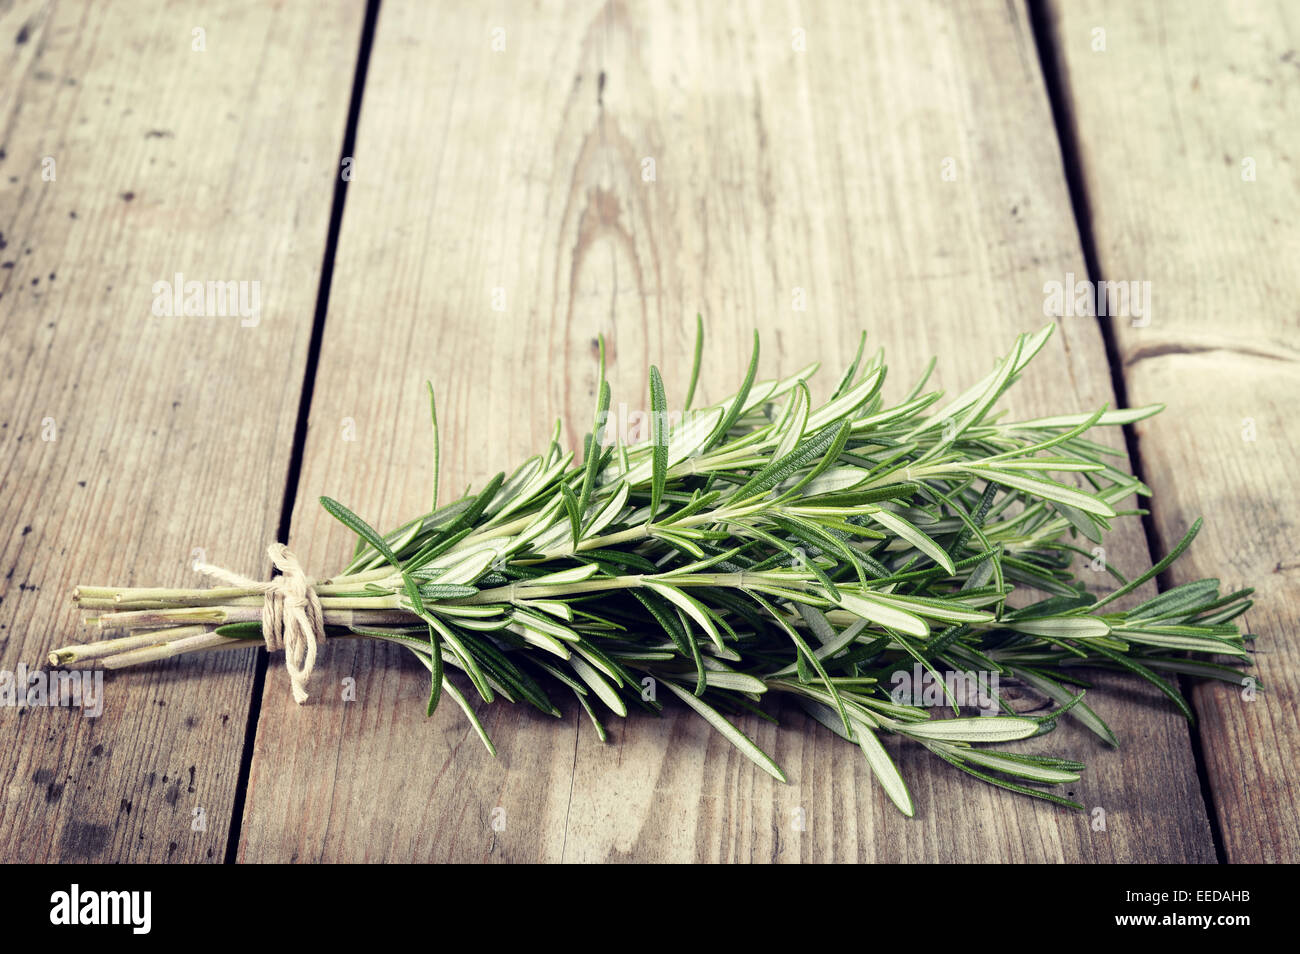 Fresh bunch of rosemary on wooden table. Aromatic evergreen herb, many culinary and medicinal uses. Rosmarinus officinalis. Stock Photo